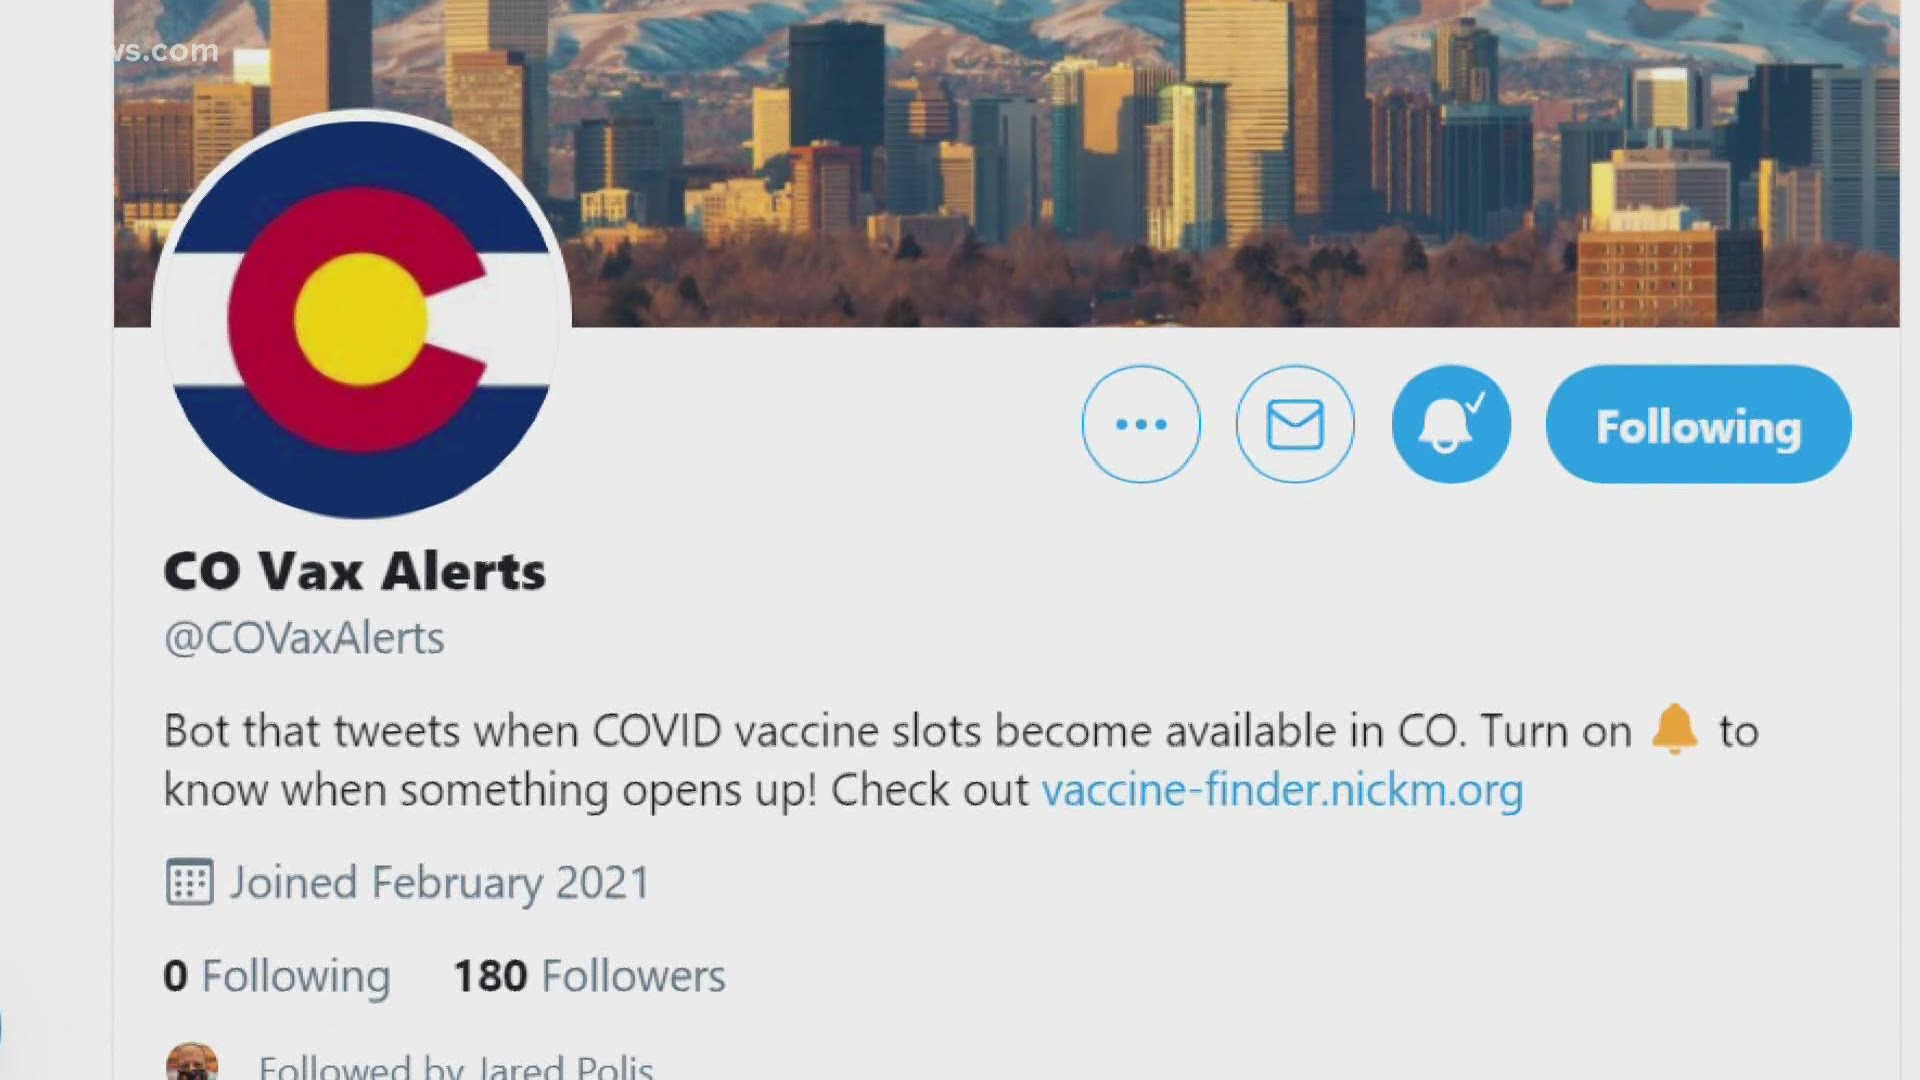 The Twitter account, @COVaxAlerts, automatically tweets when a vaccine appointment in Colorado becomes available.